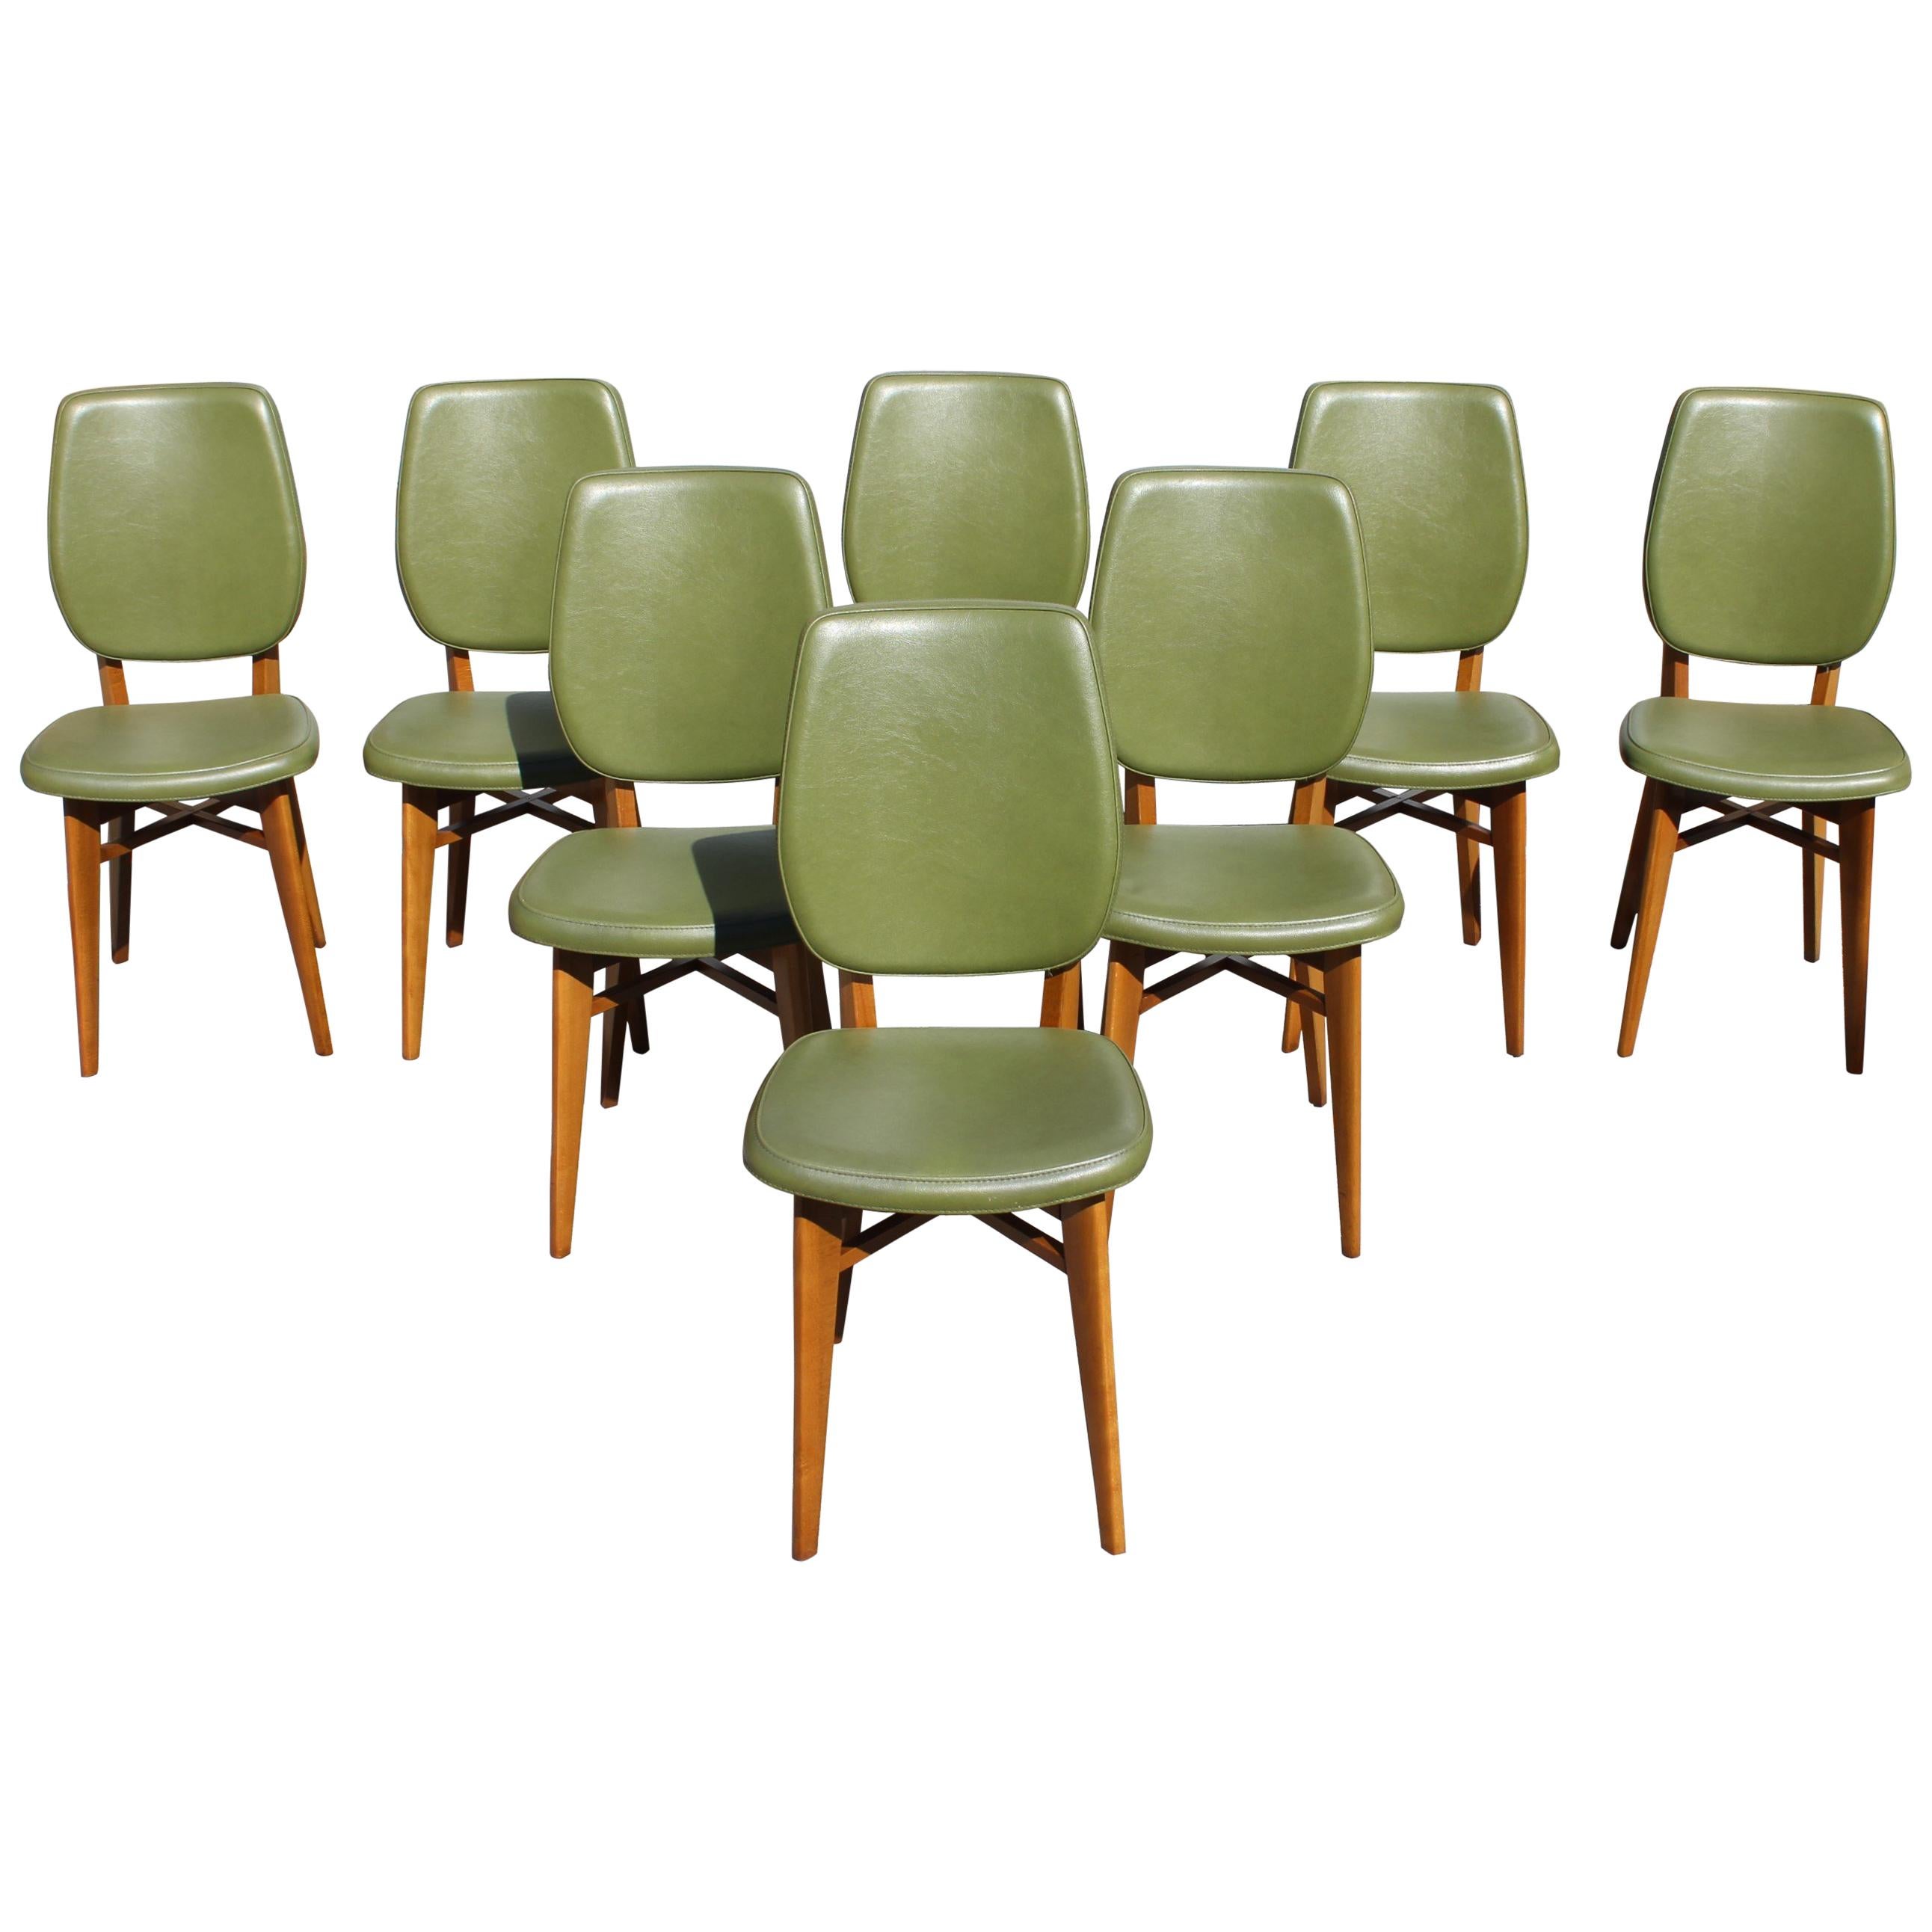 Classic Set of 8 French Art Deco Solid Mahogany Dining Chairs, circa 1940s